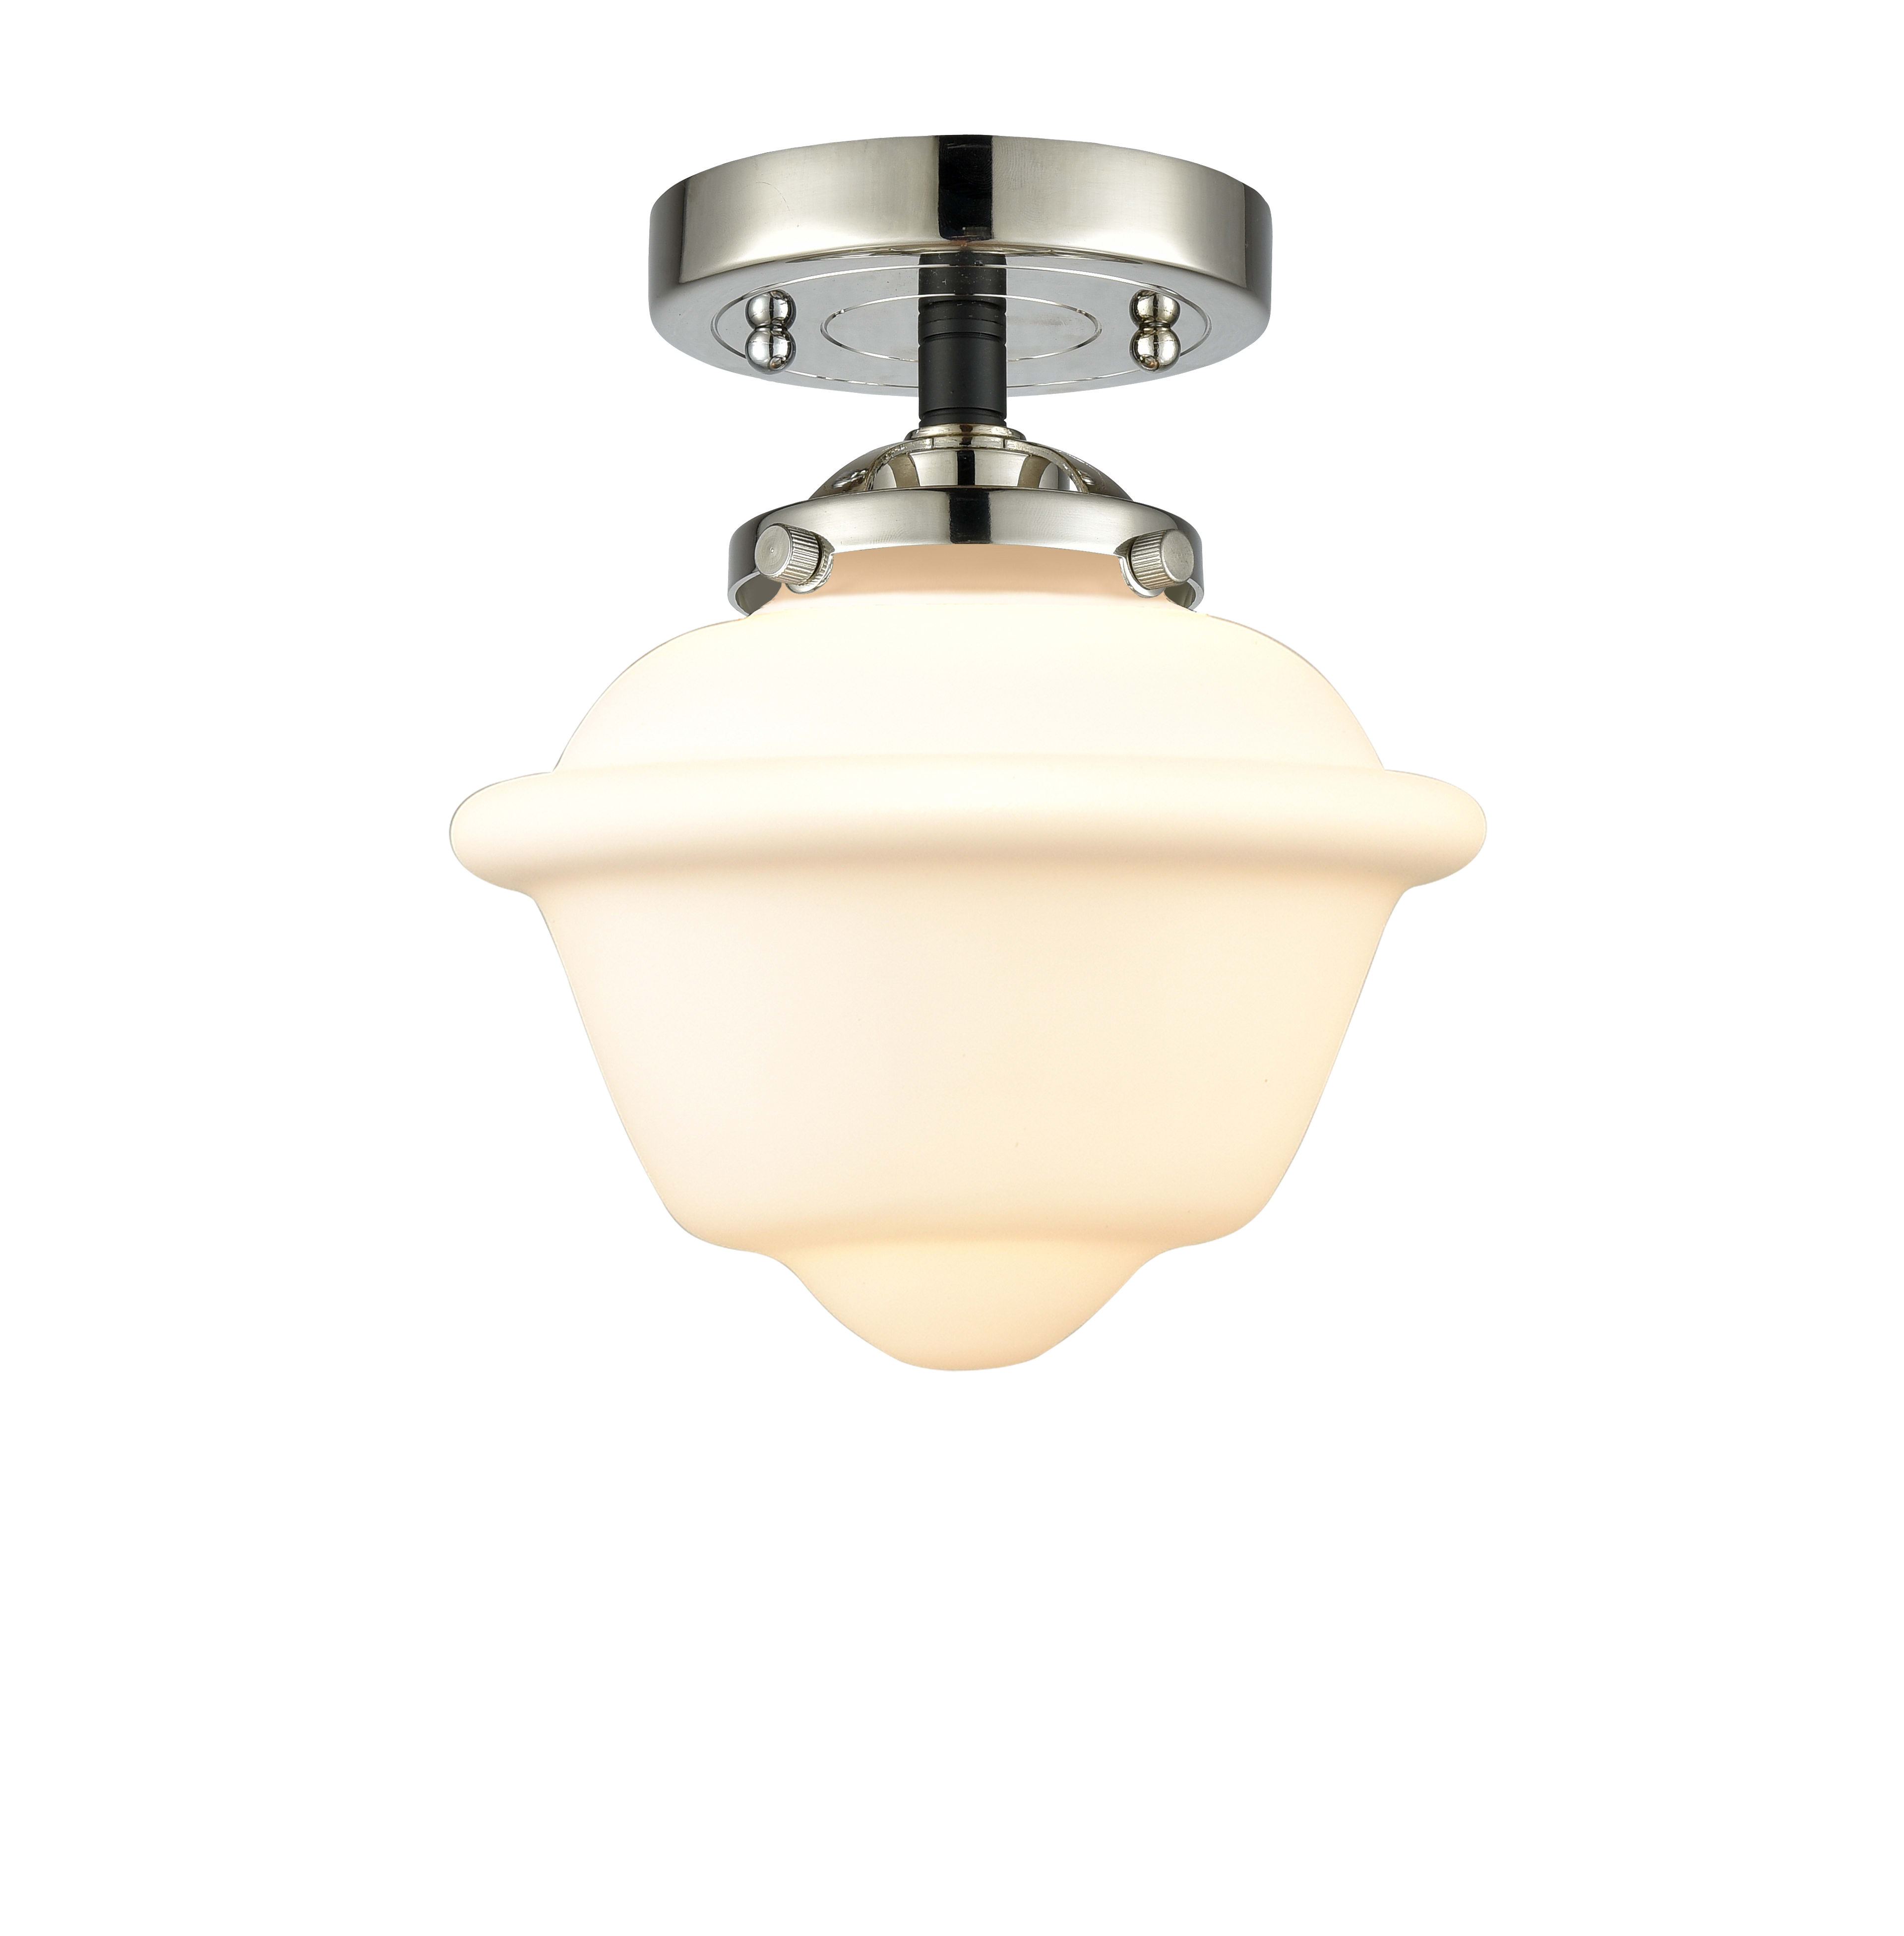 Innovations Lighting 284-1S-OB-G531-LED Small Oxford 1 Light Mini Pendant Part of The Nouveau Collection 